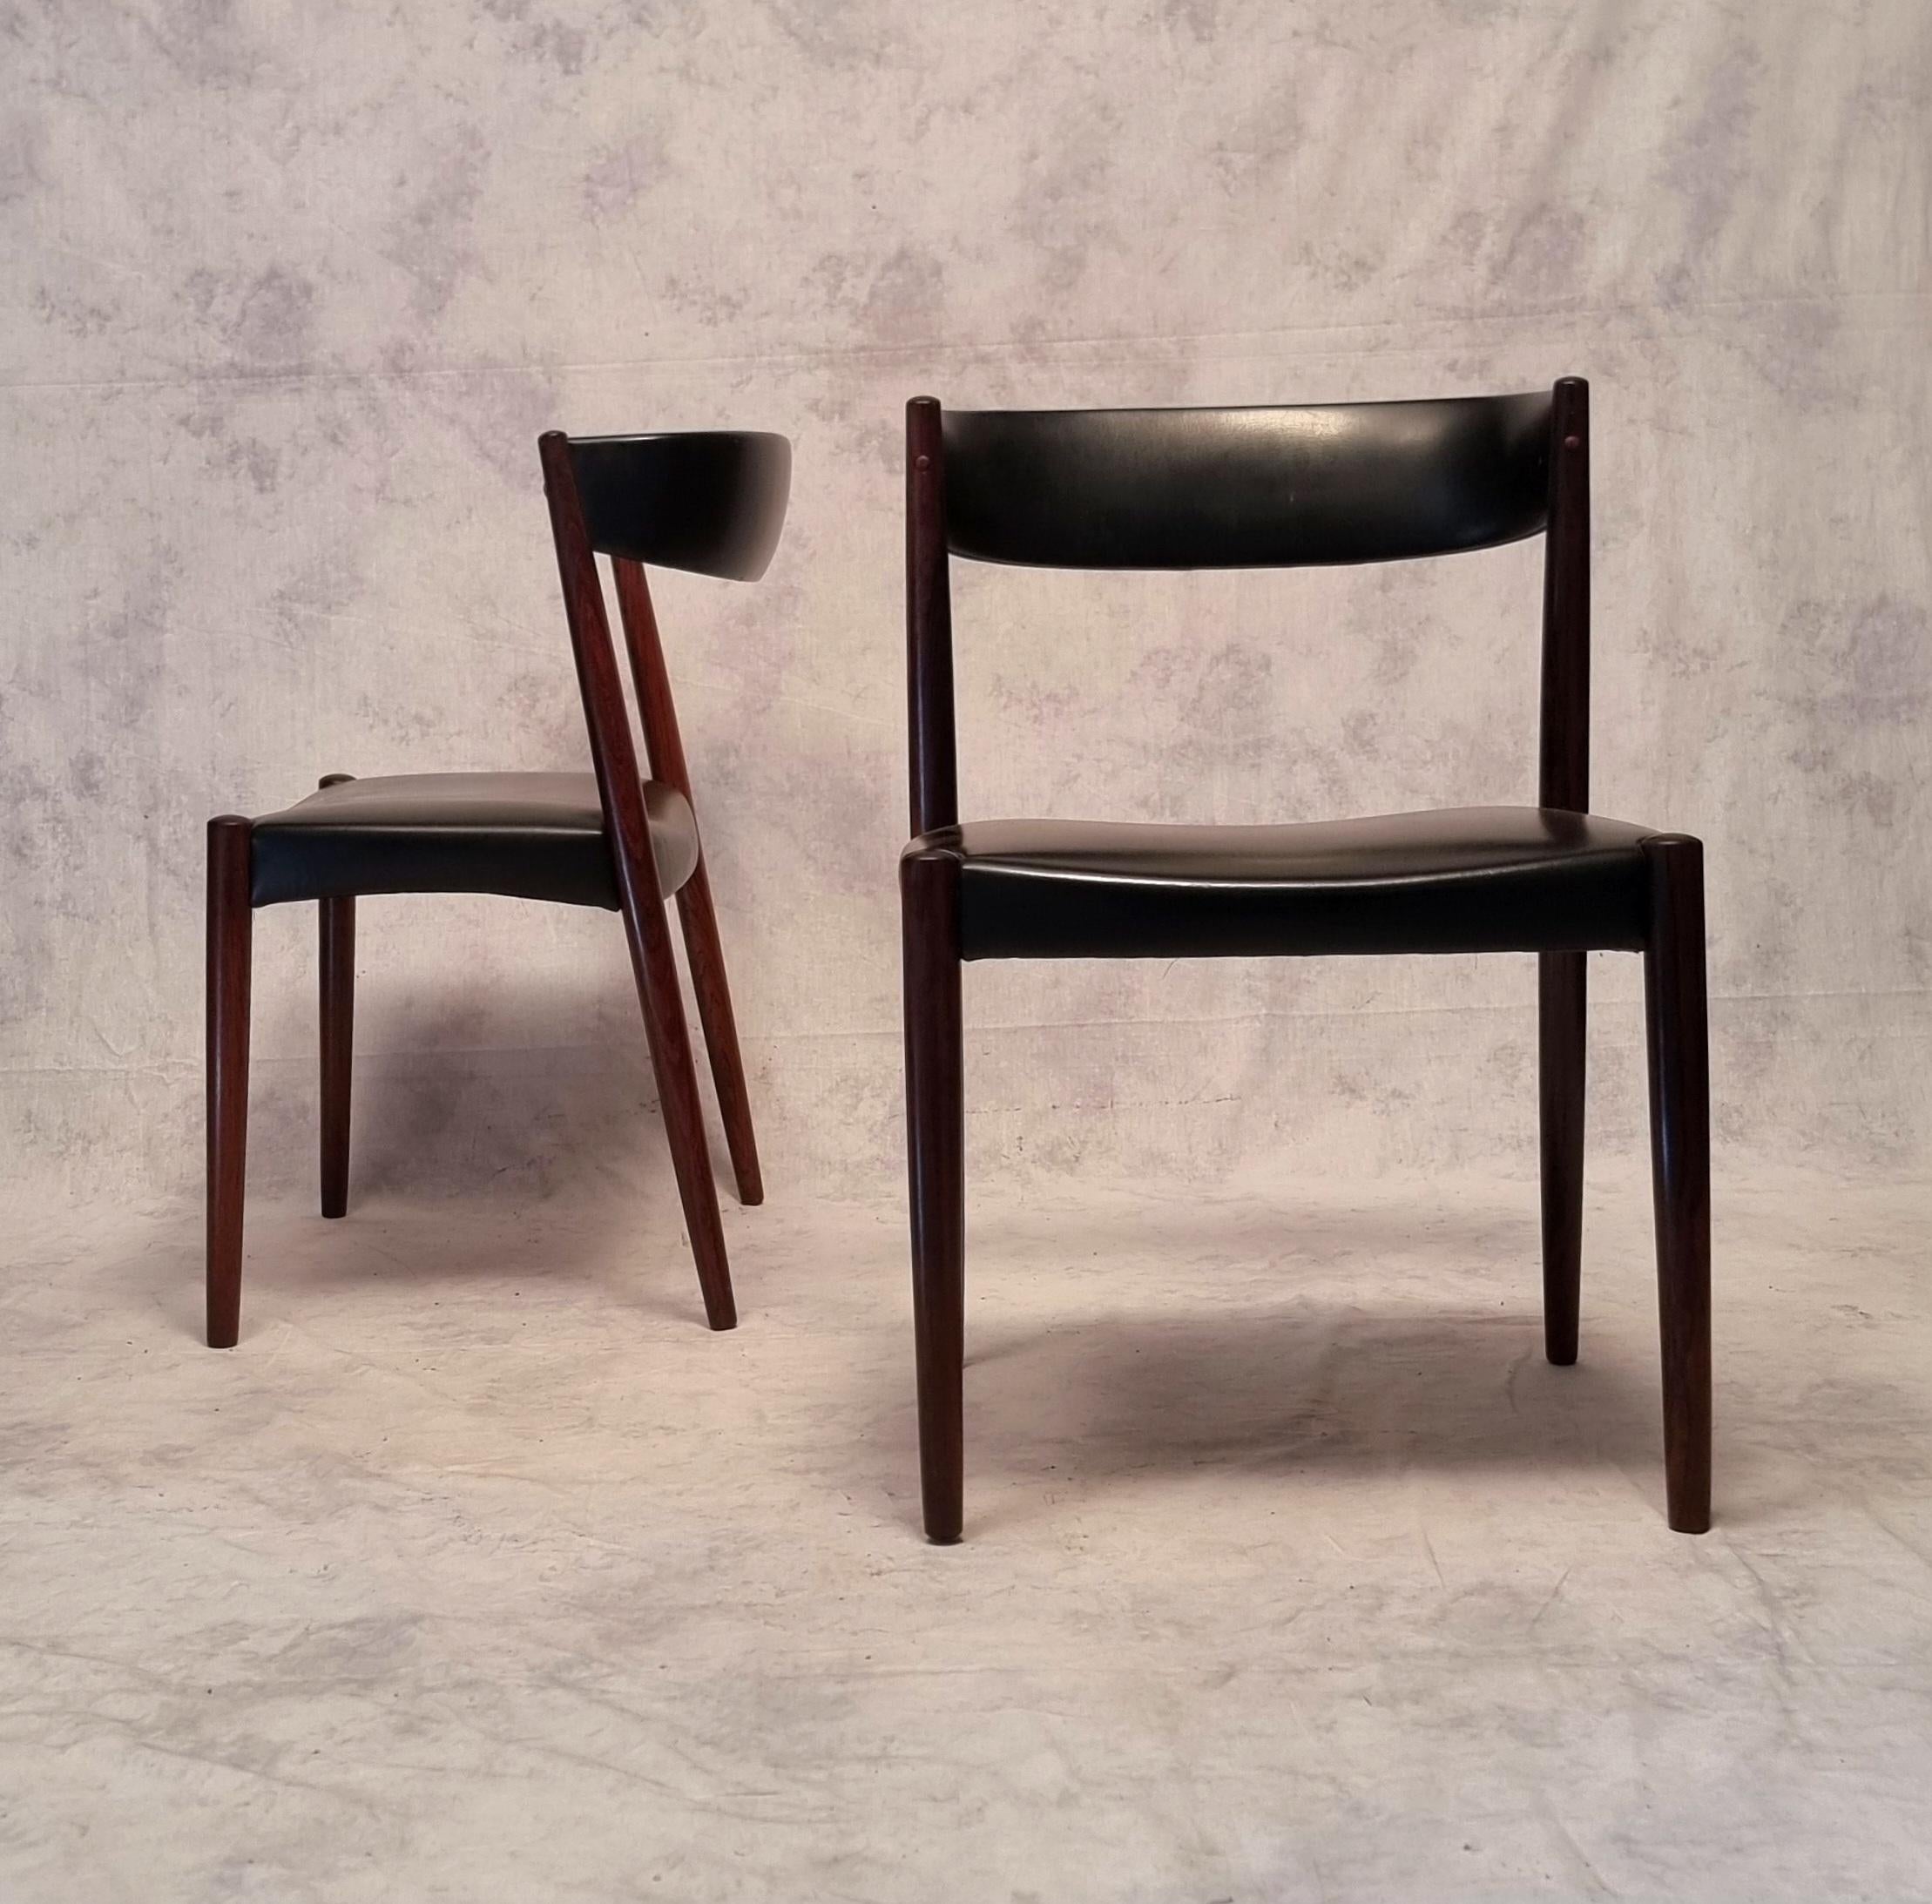 Mid-20th Century Series Of Four Scandinavian Chairs - Vejle Mobelfabrik - Rosewood - Ca 1960 For Sale